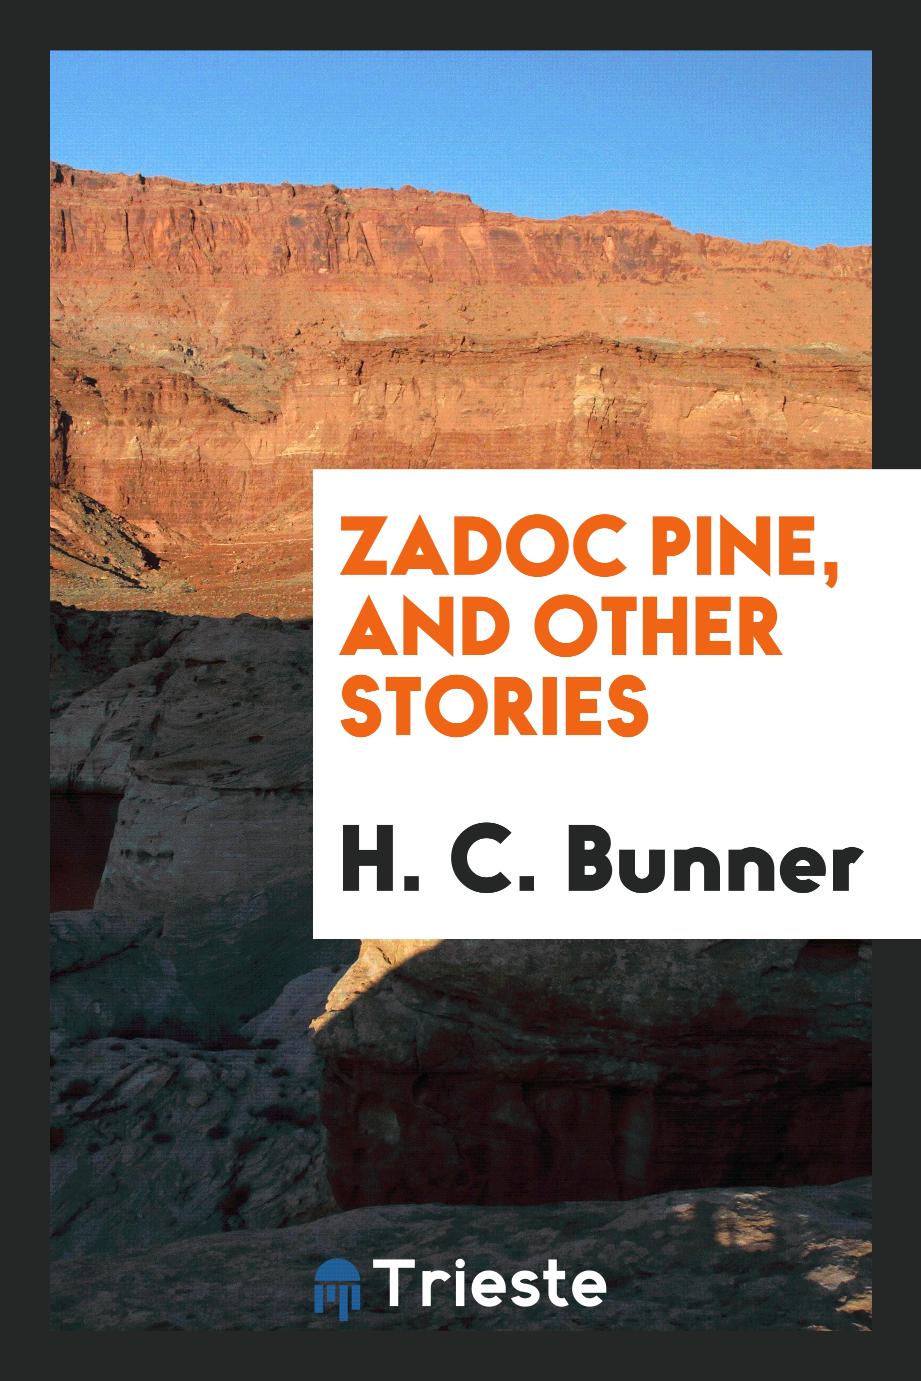 Zadoc pine, and other stories